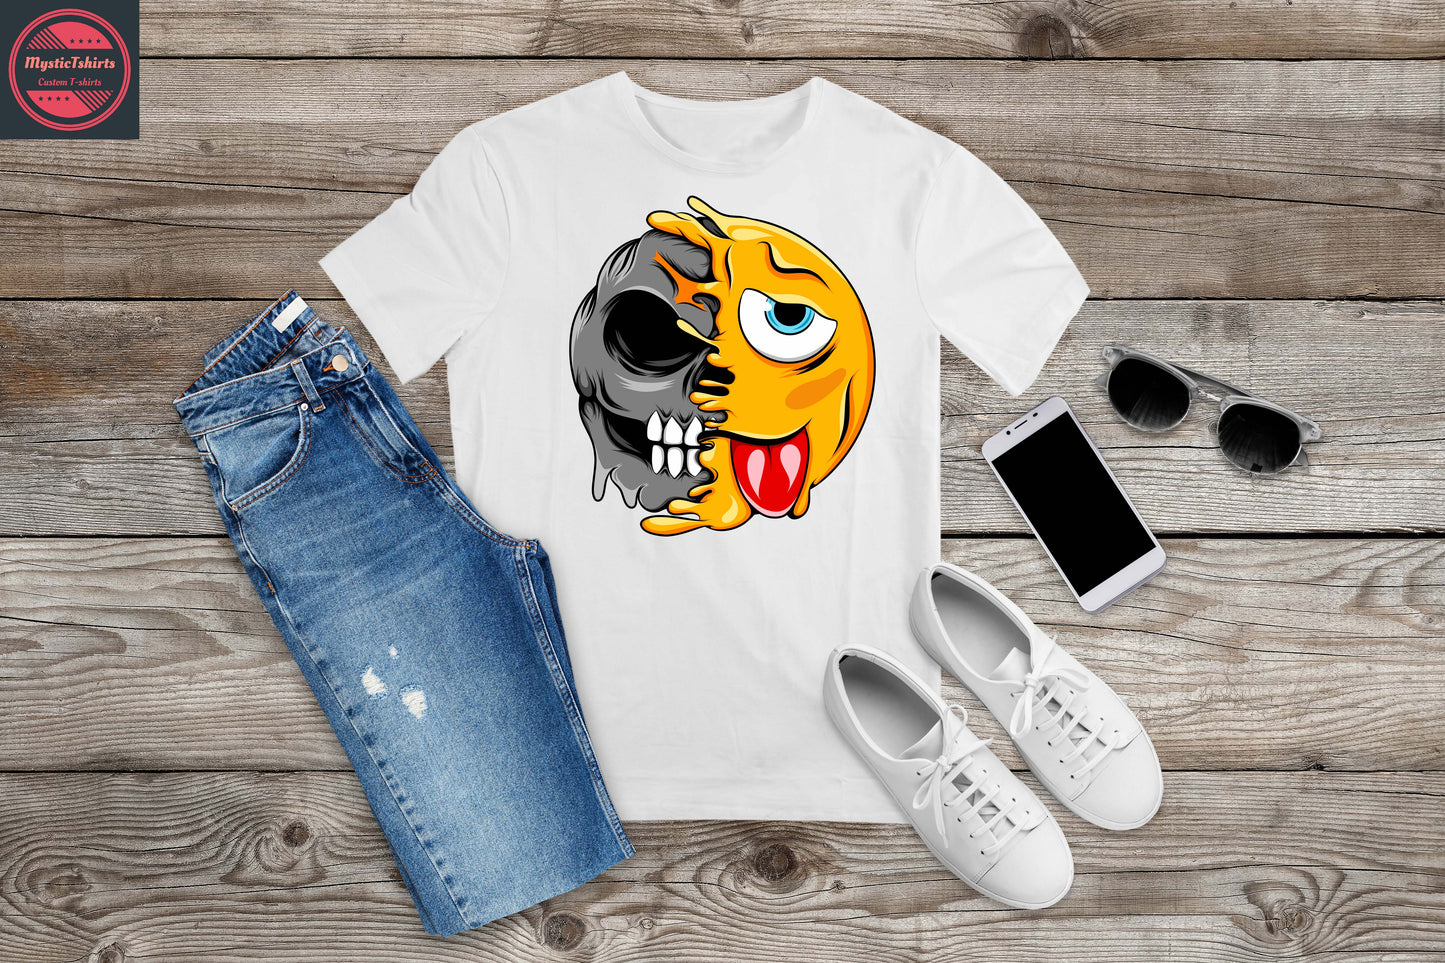 098. CRAZY FACE, Personalized T-Shirt, Custom Text, Make Your Own Shirt, Custom Tee